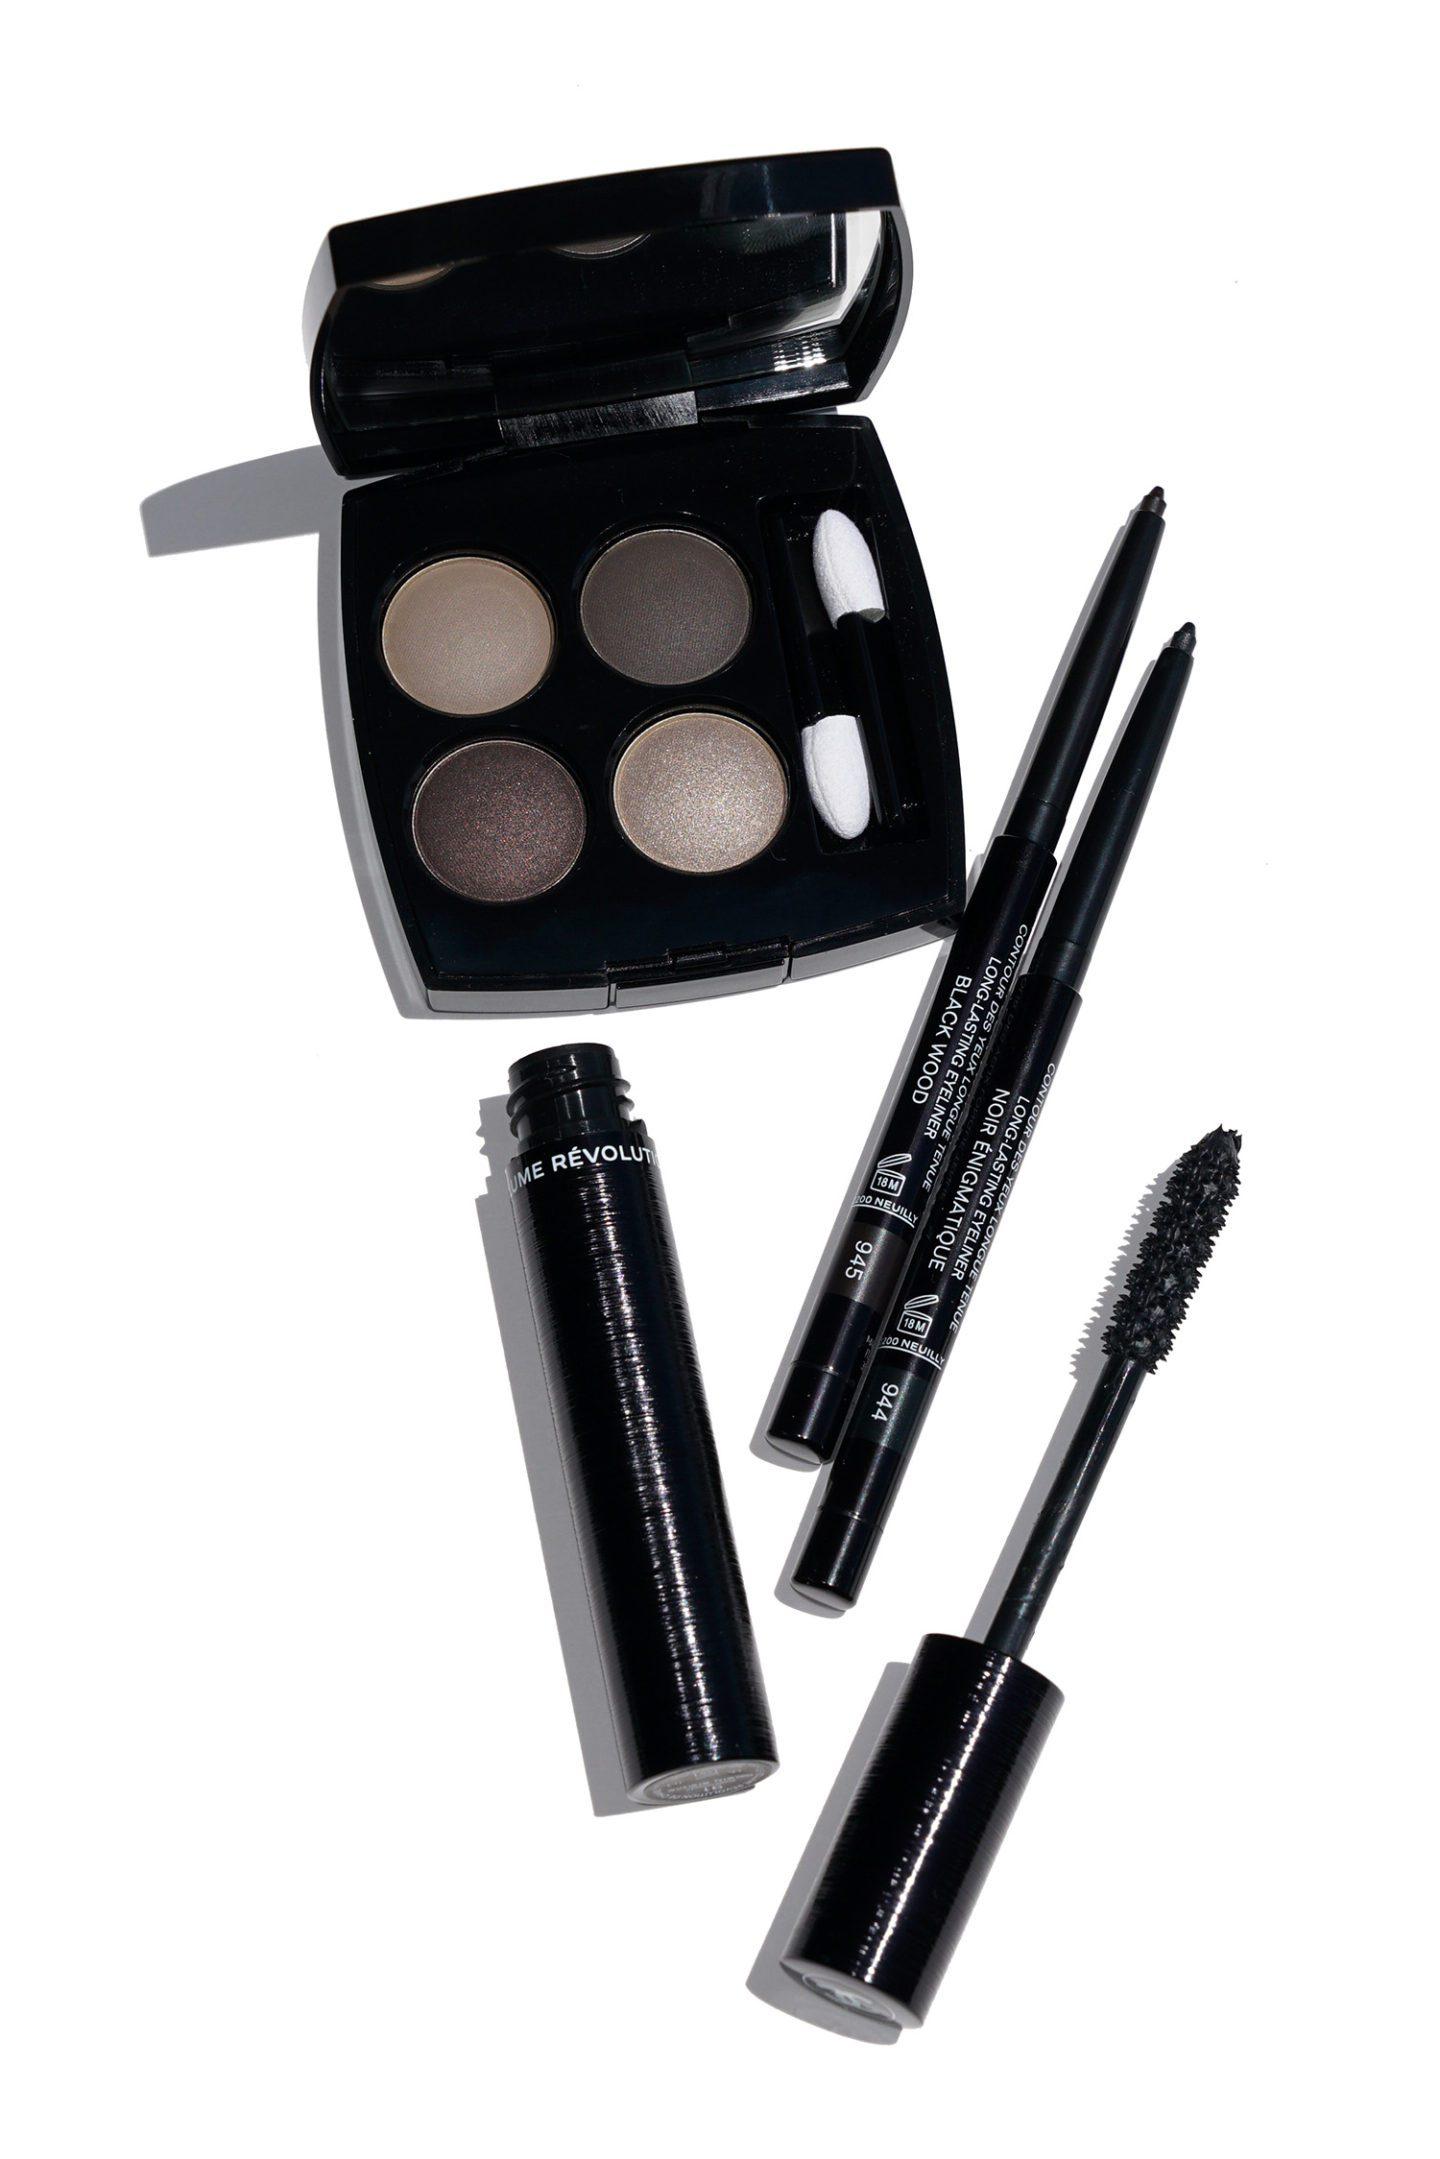 Chanel Blurry Grey, Noir Engimatique, Black Wood and Volcan Review